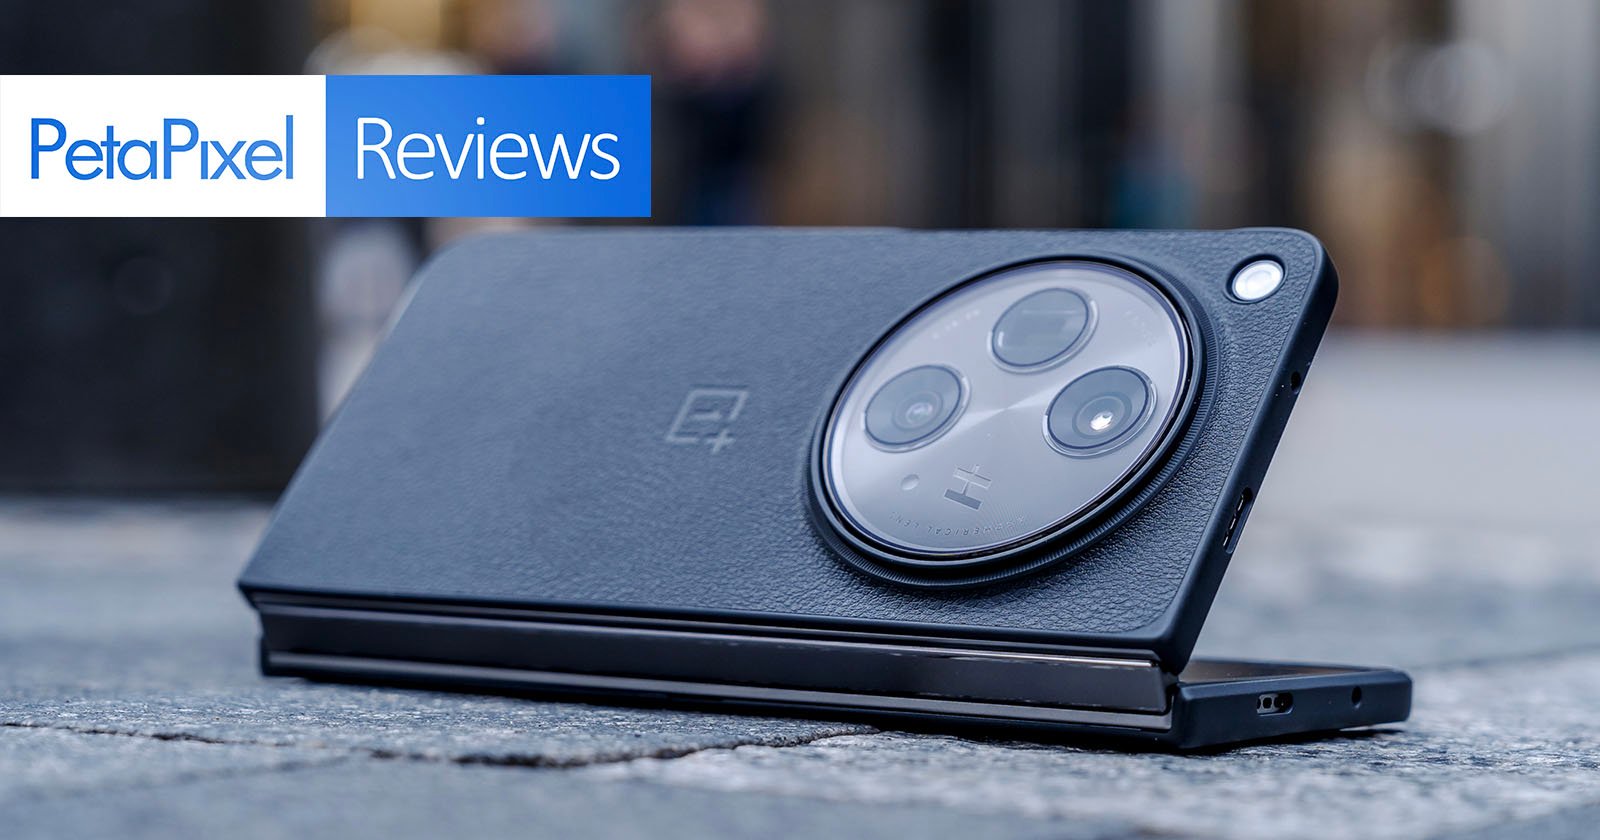 OnePlus Open Review: No Skimping on Cameras Here